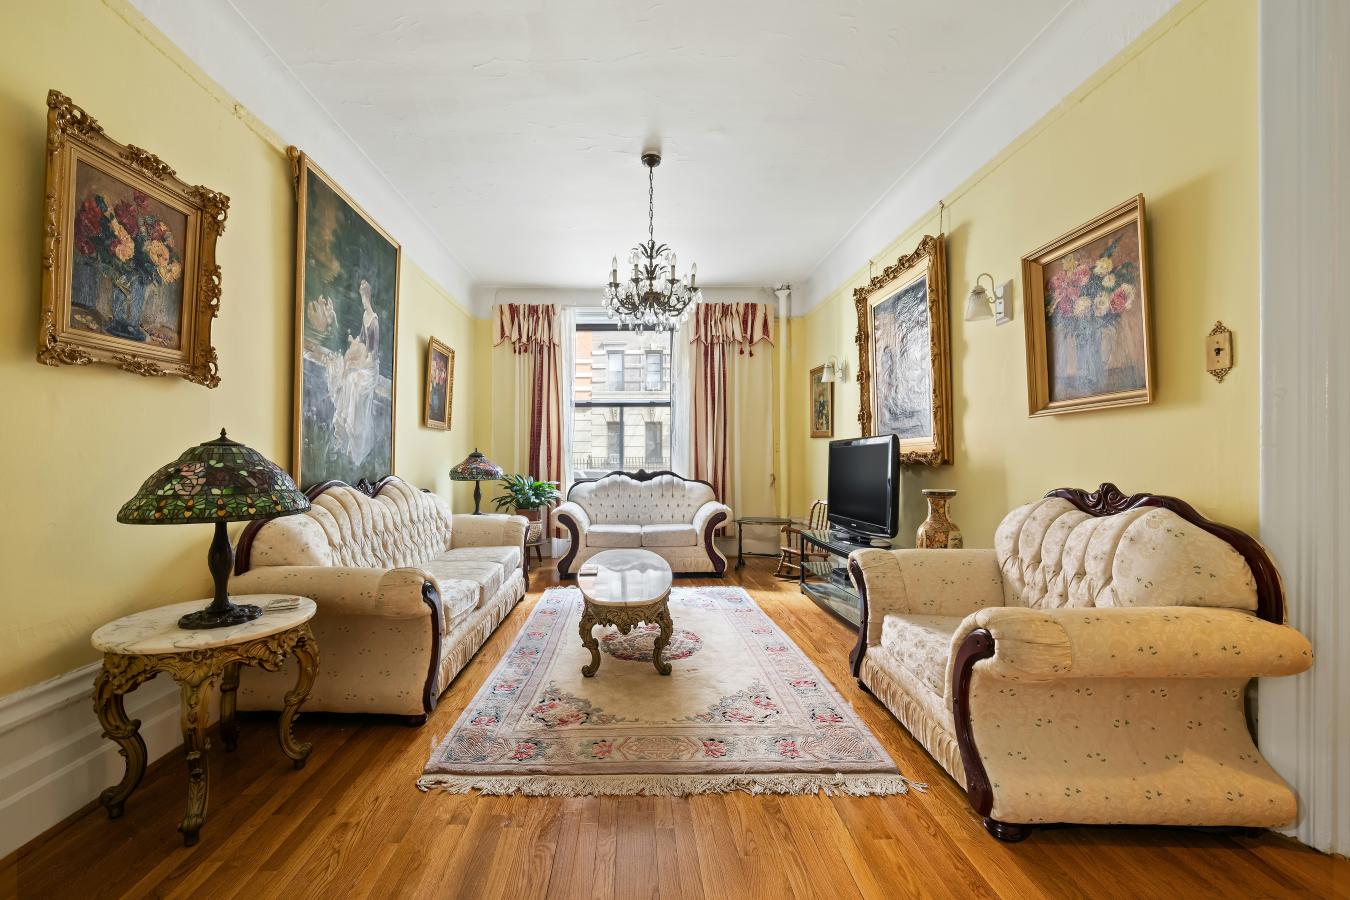 528 West 111th Street, Morningside Heights, New York, 10025, United States, 3 Bedrooms Bedrooms, ,1 BathroomBathrooms,Residential,For Sale,528 West 111th Street,1499385